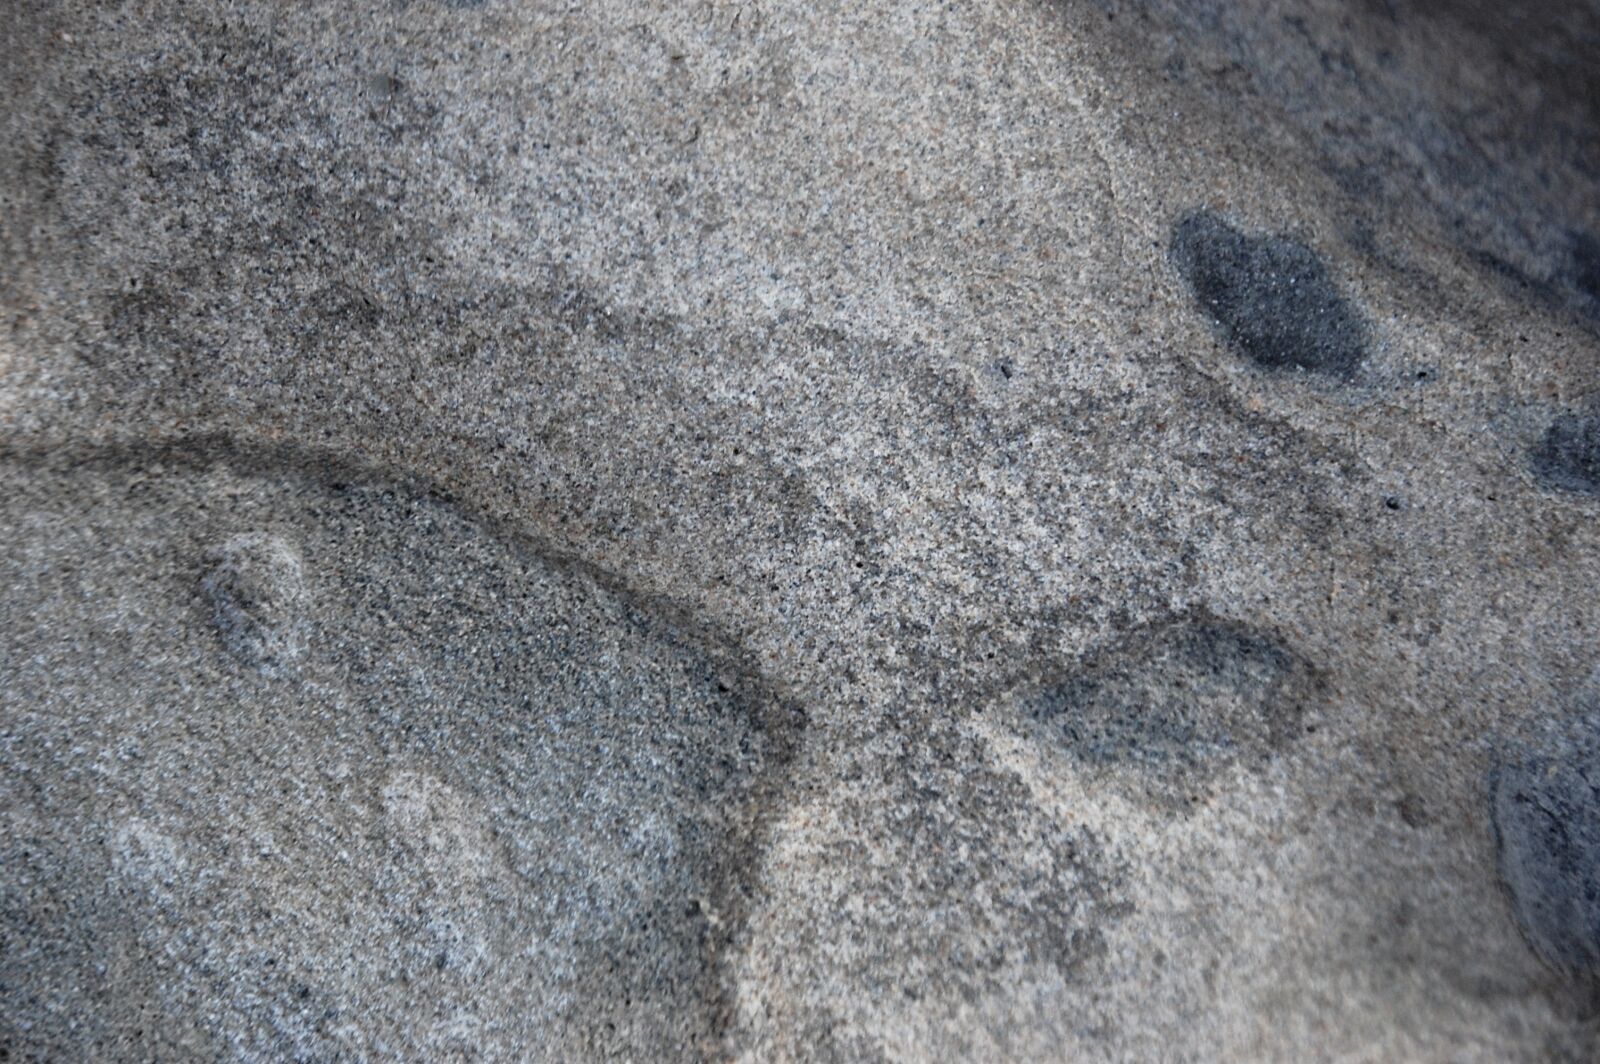 Tamron AF 18-270mm F3.5-6.3 Di II VC LD Aspherical (IF) MACRO sample photo. Stone, background, abstacle photography